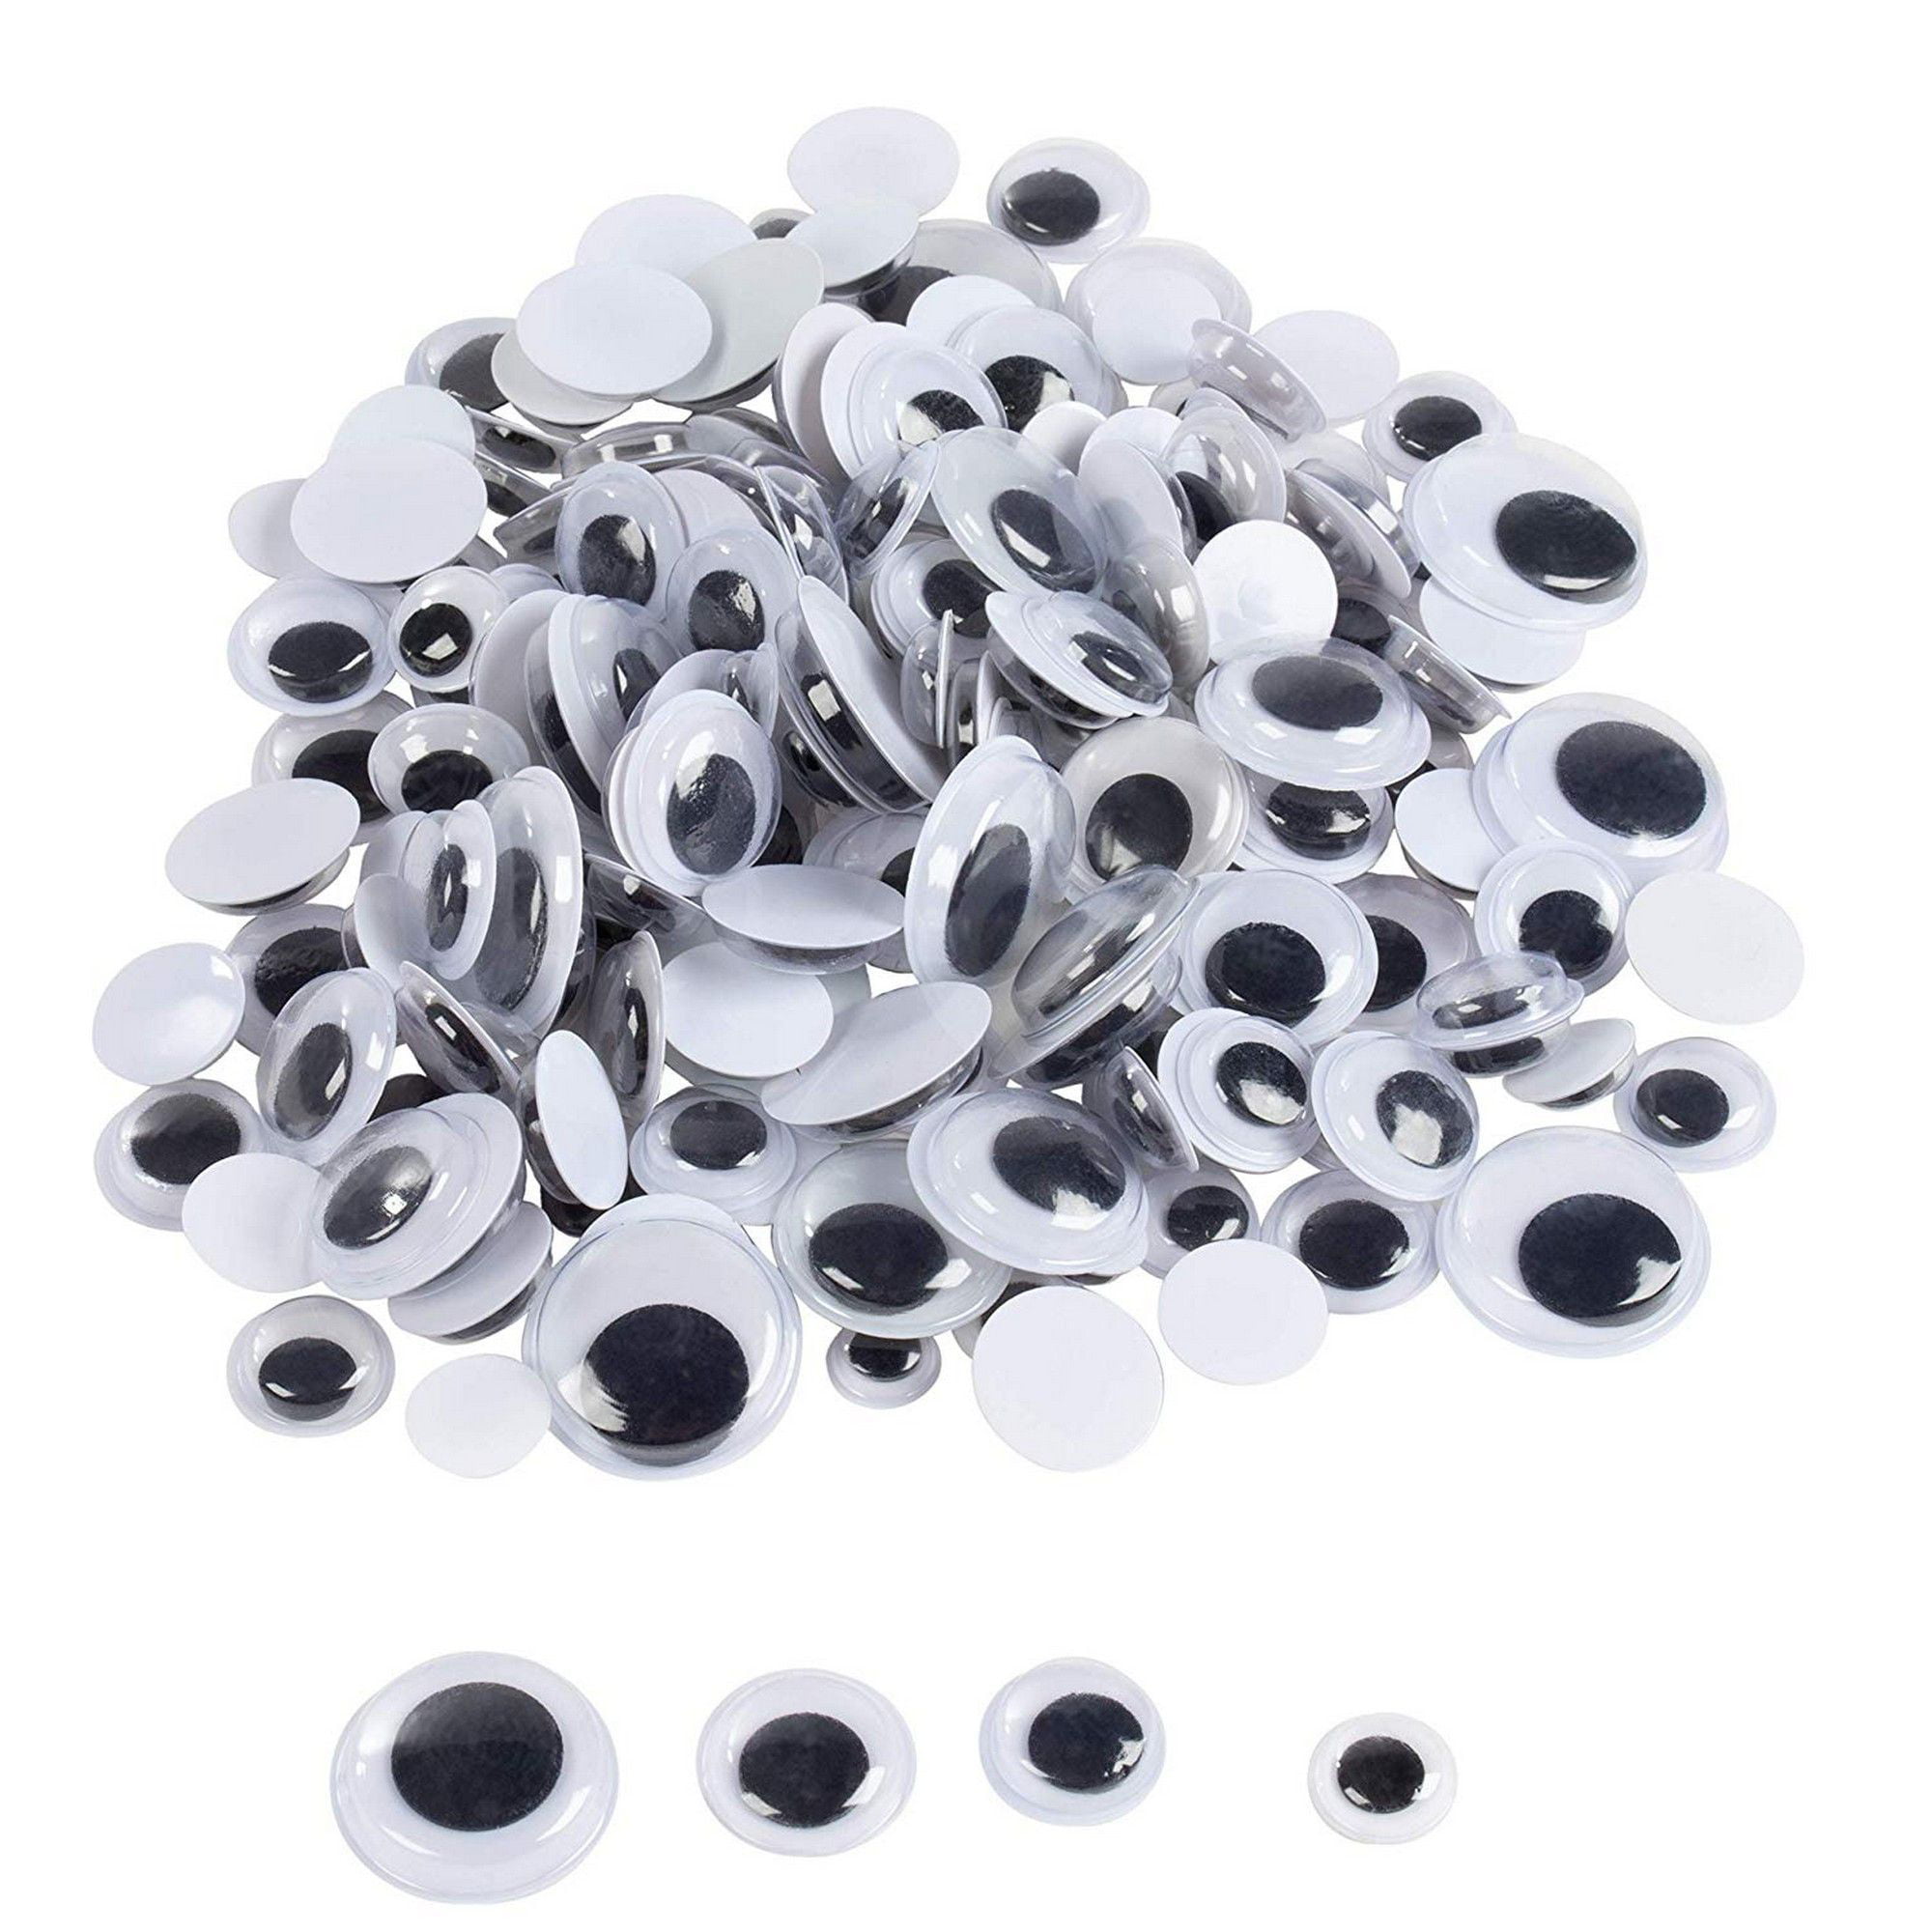 Digood Googly Wiggle Eyes Self-Adhesive Wobbly Eyes for DIY Doll Making Craft Scrapbooking Accessories 10mm